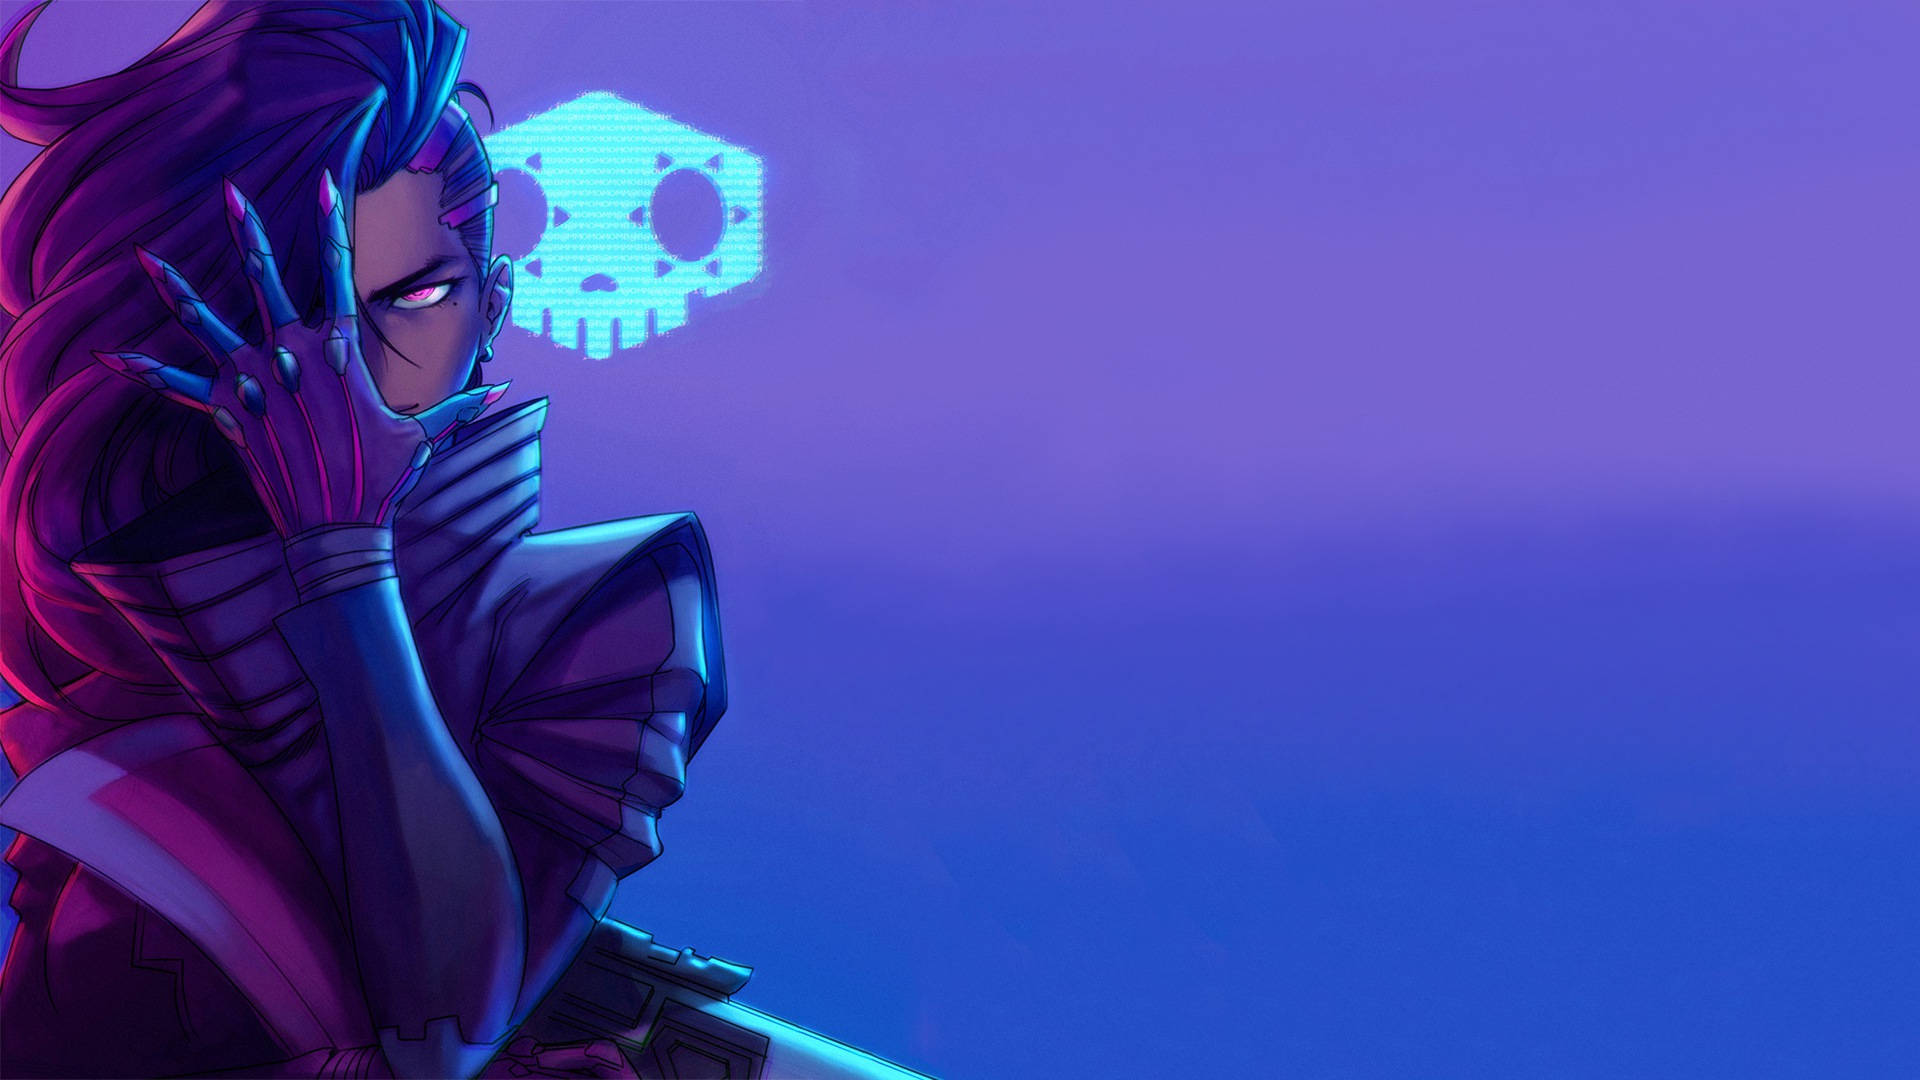 Join the hacker and activist known as Sombra and join the fight in the Overwatch universe. Wallpaper